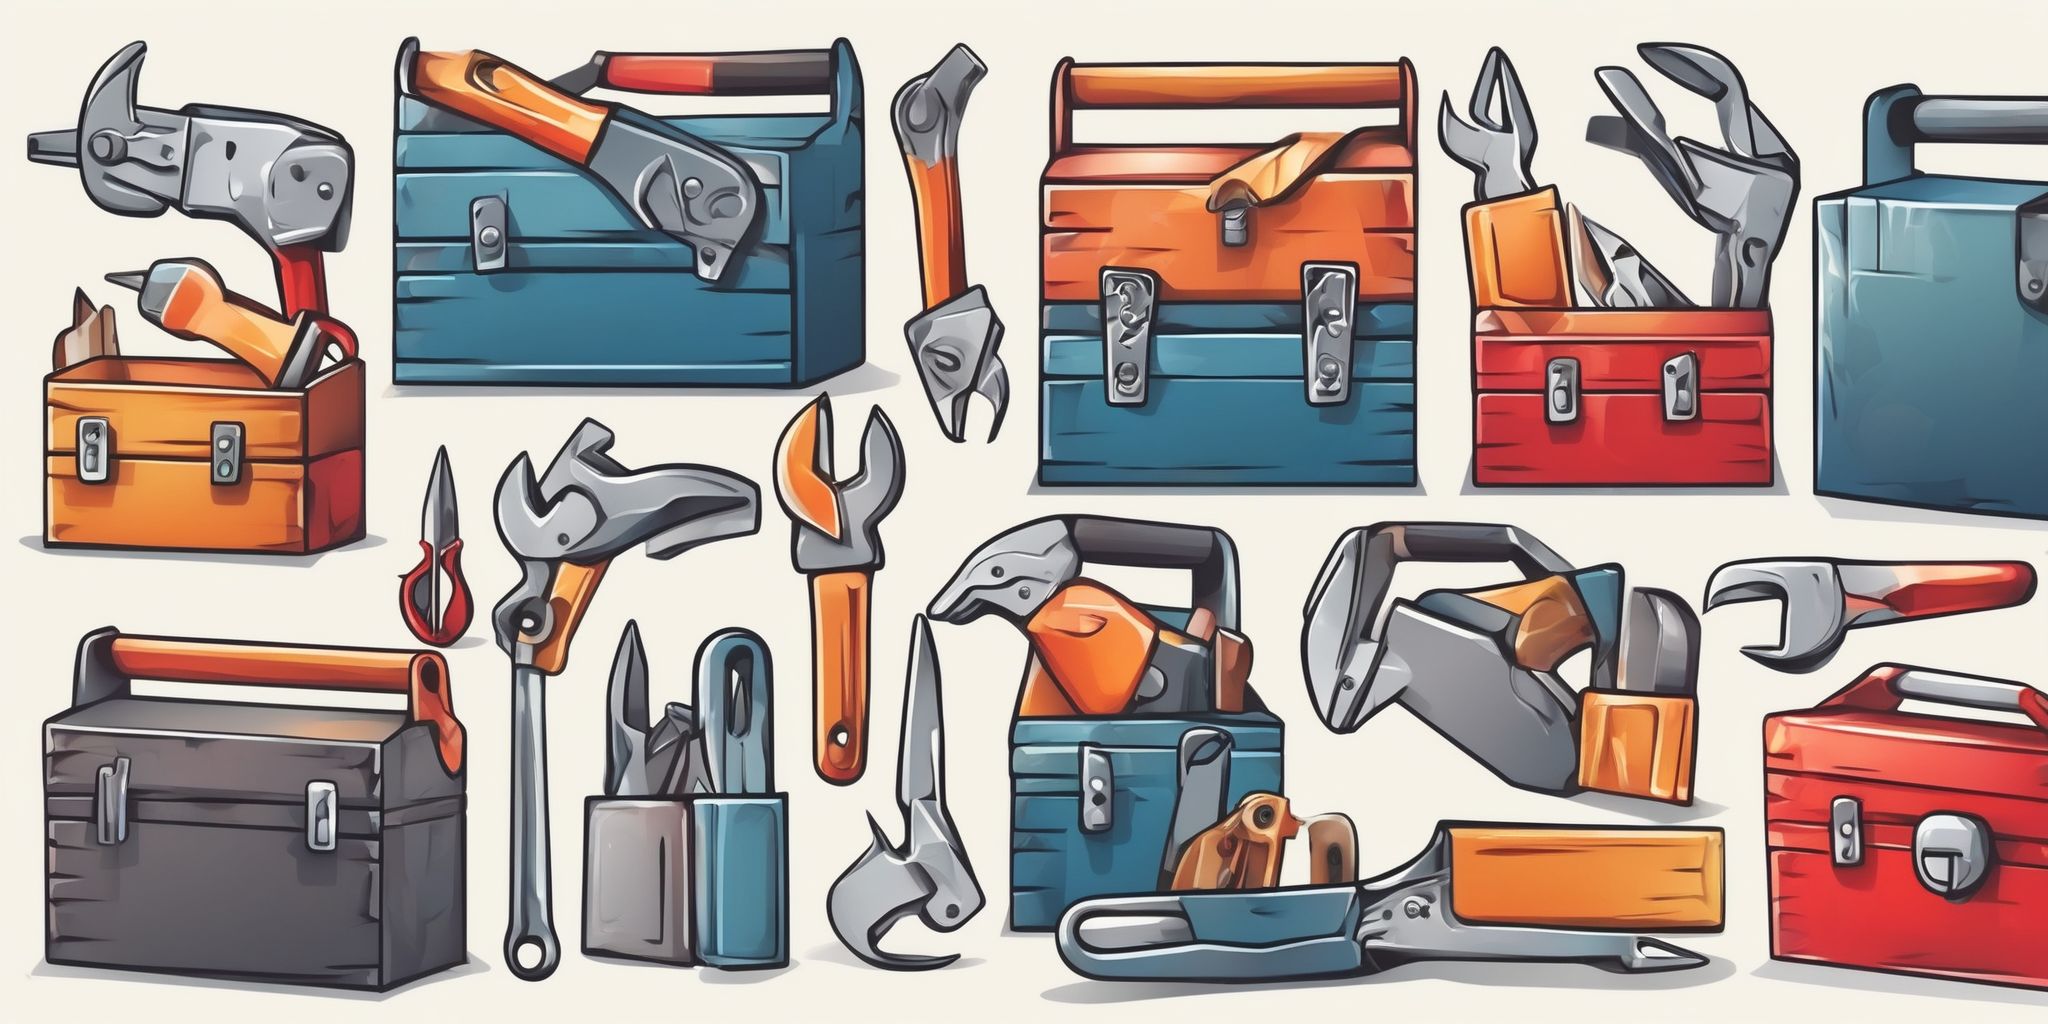 toolbox in illustration style with gradients and white background